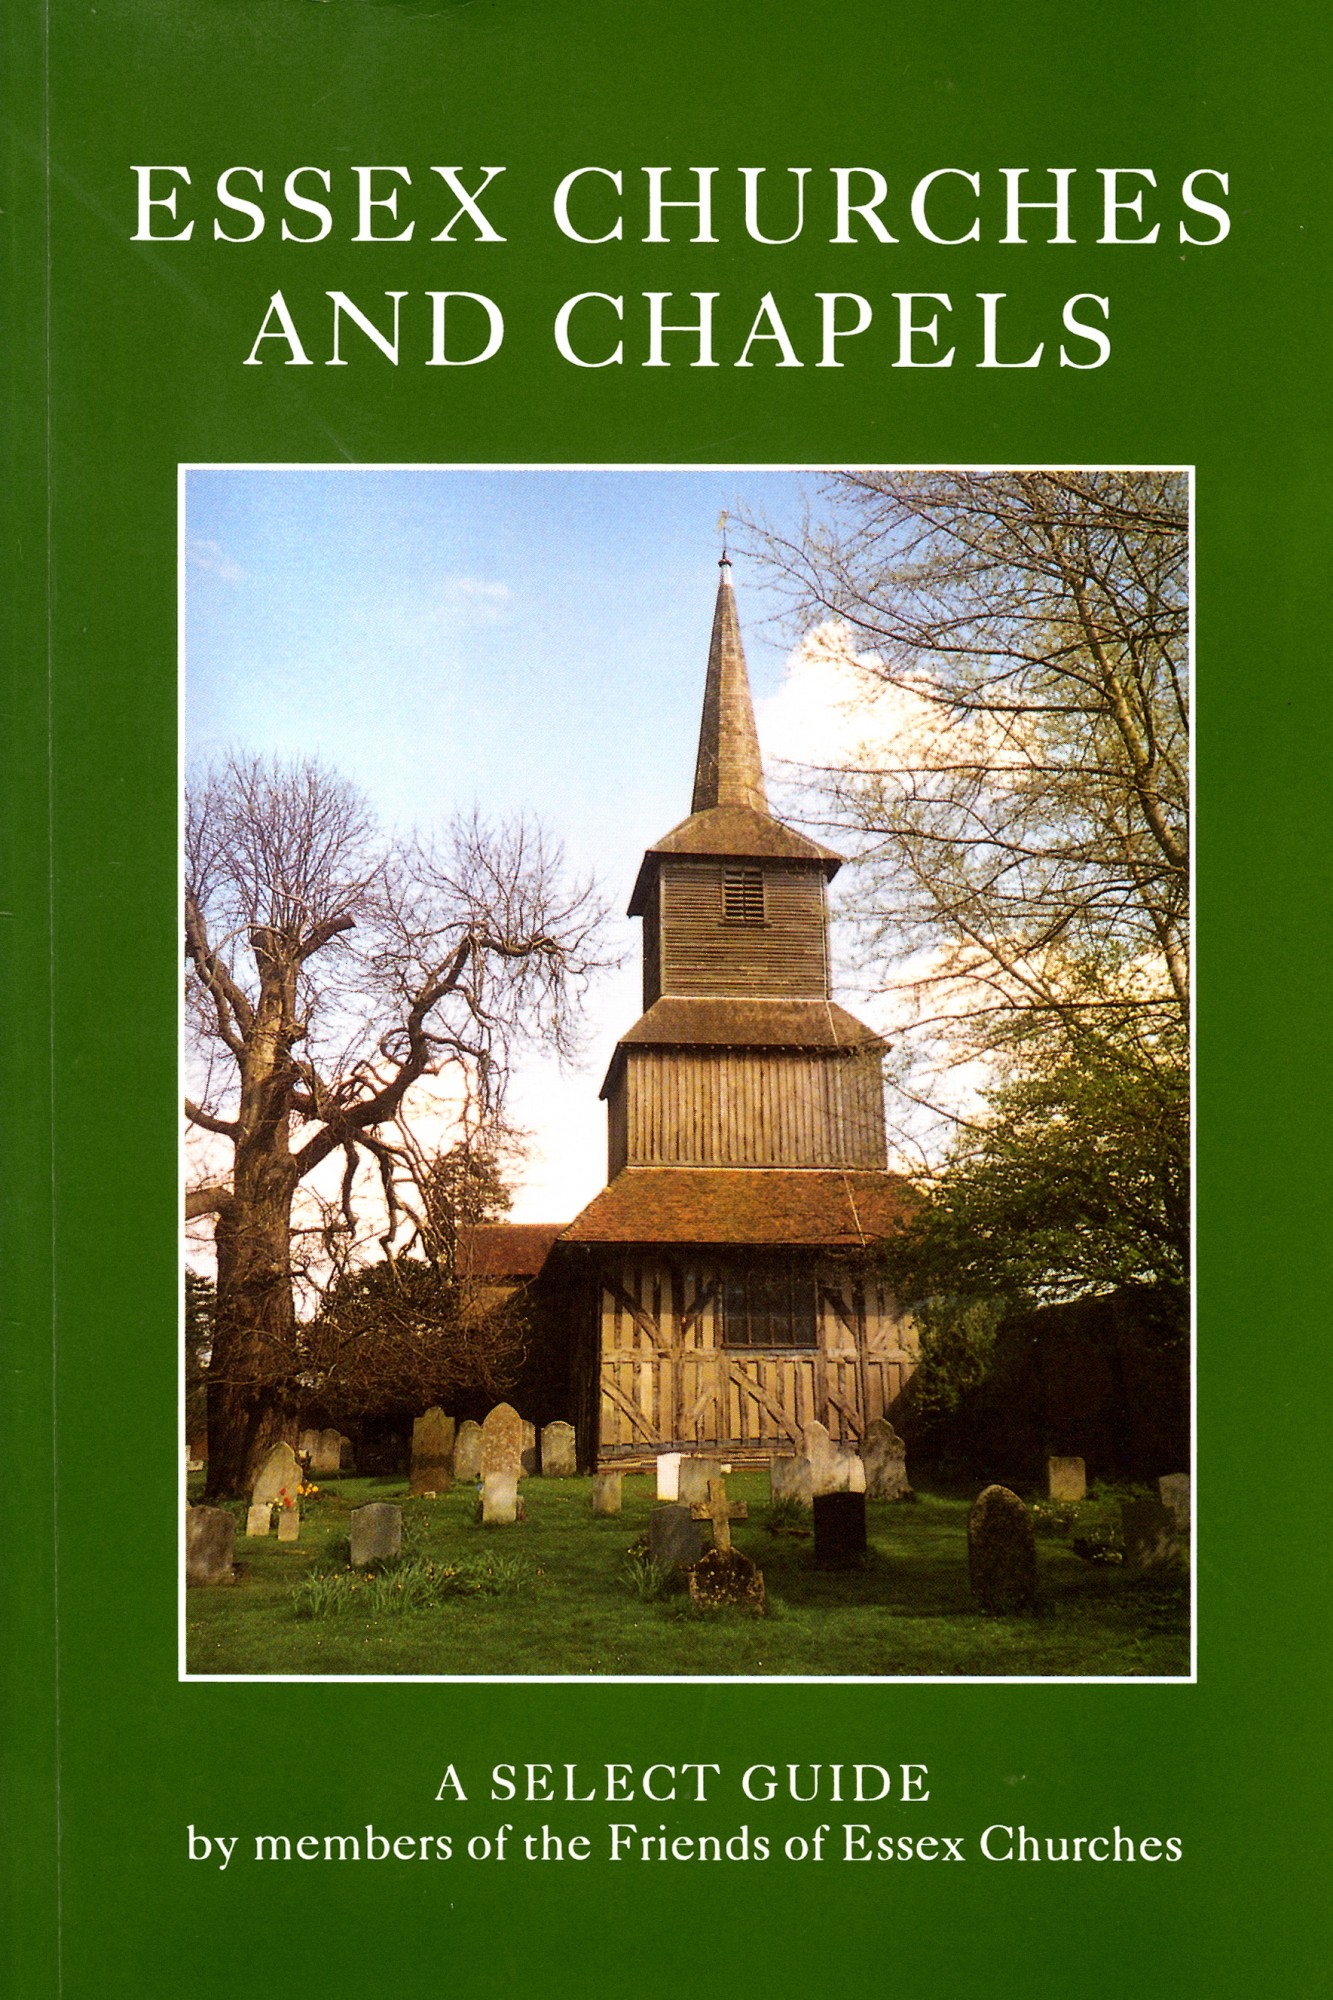 Essex Churches and Chapels